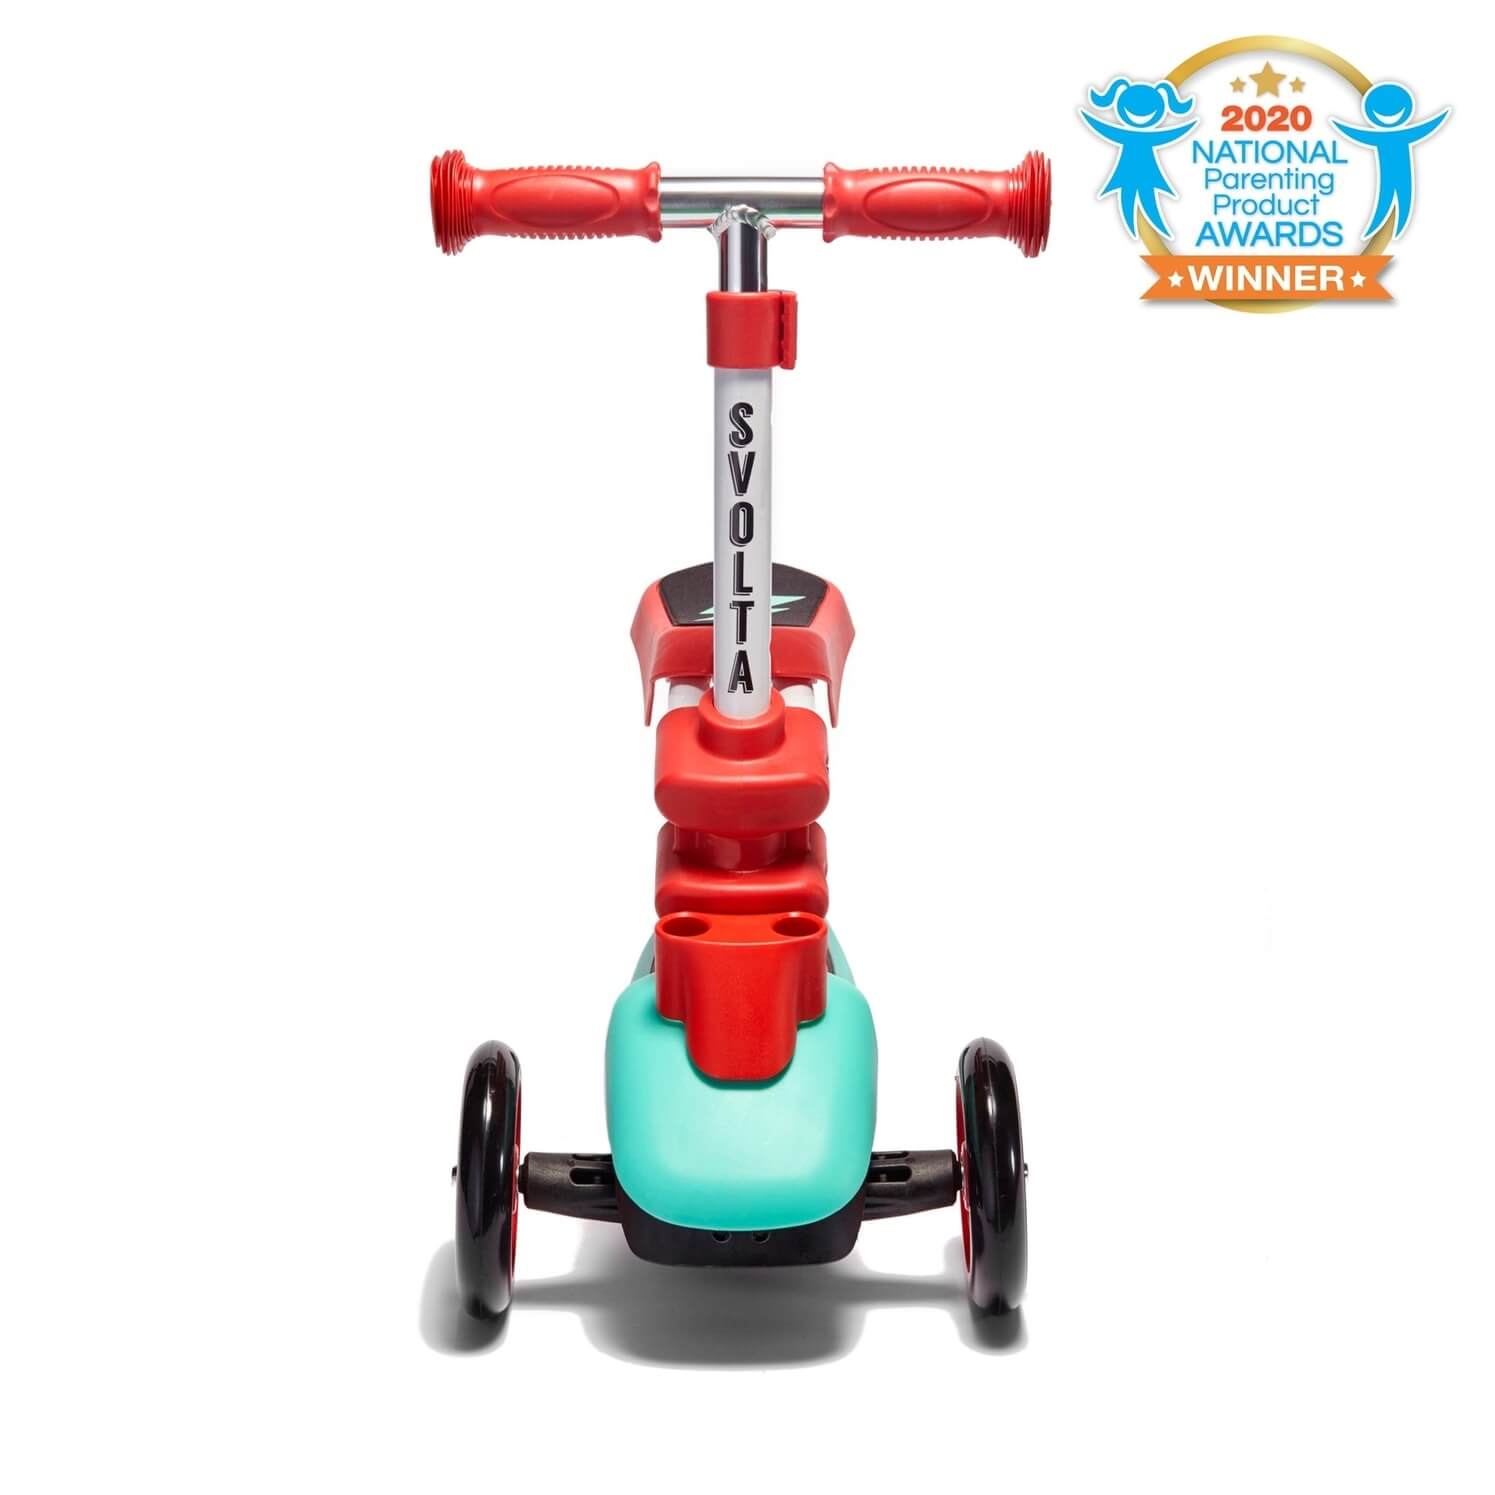 Award winning Svolta Ace 2-in-1 Toddler Scooter Ride On Red Aqua Front